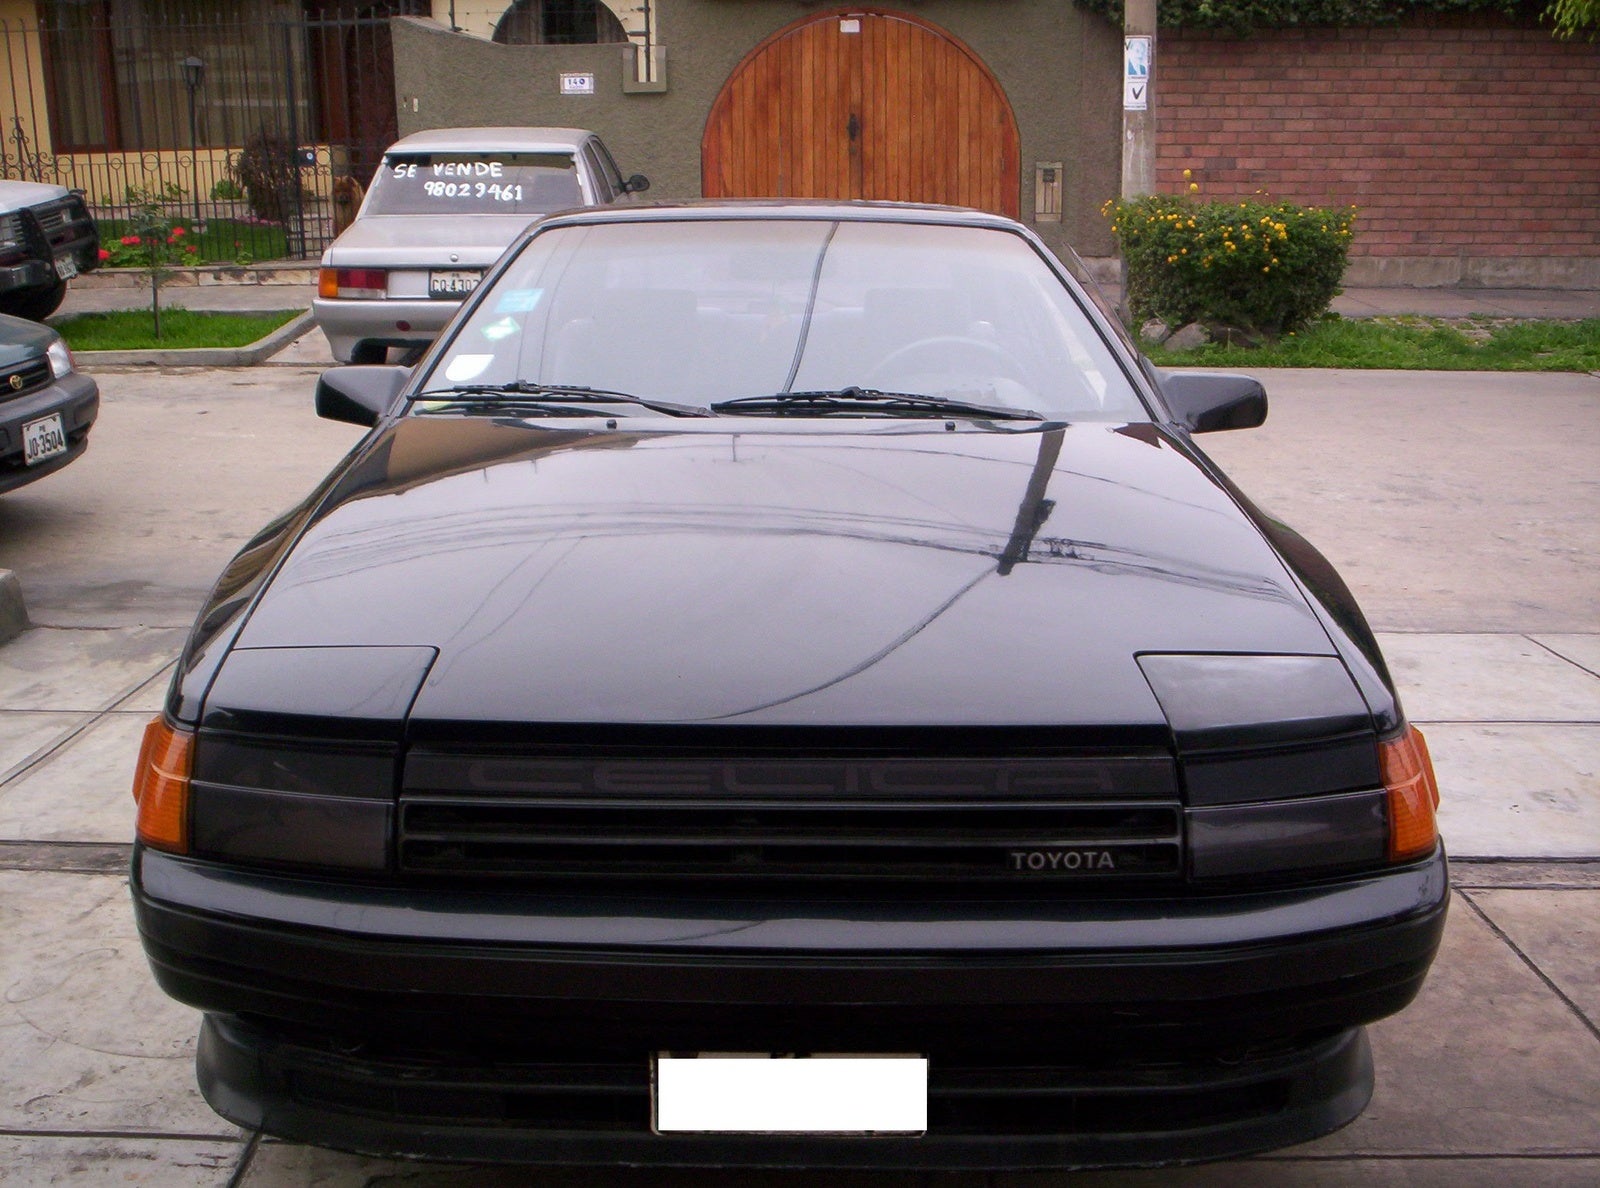 1986 Toyota celica gt coupe